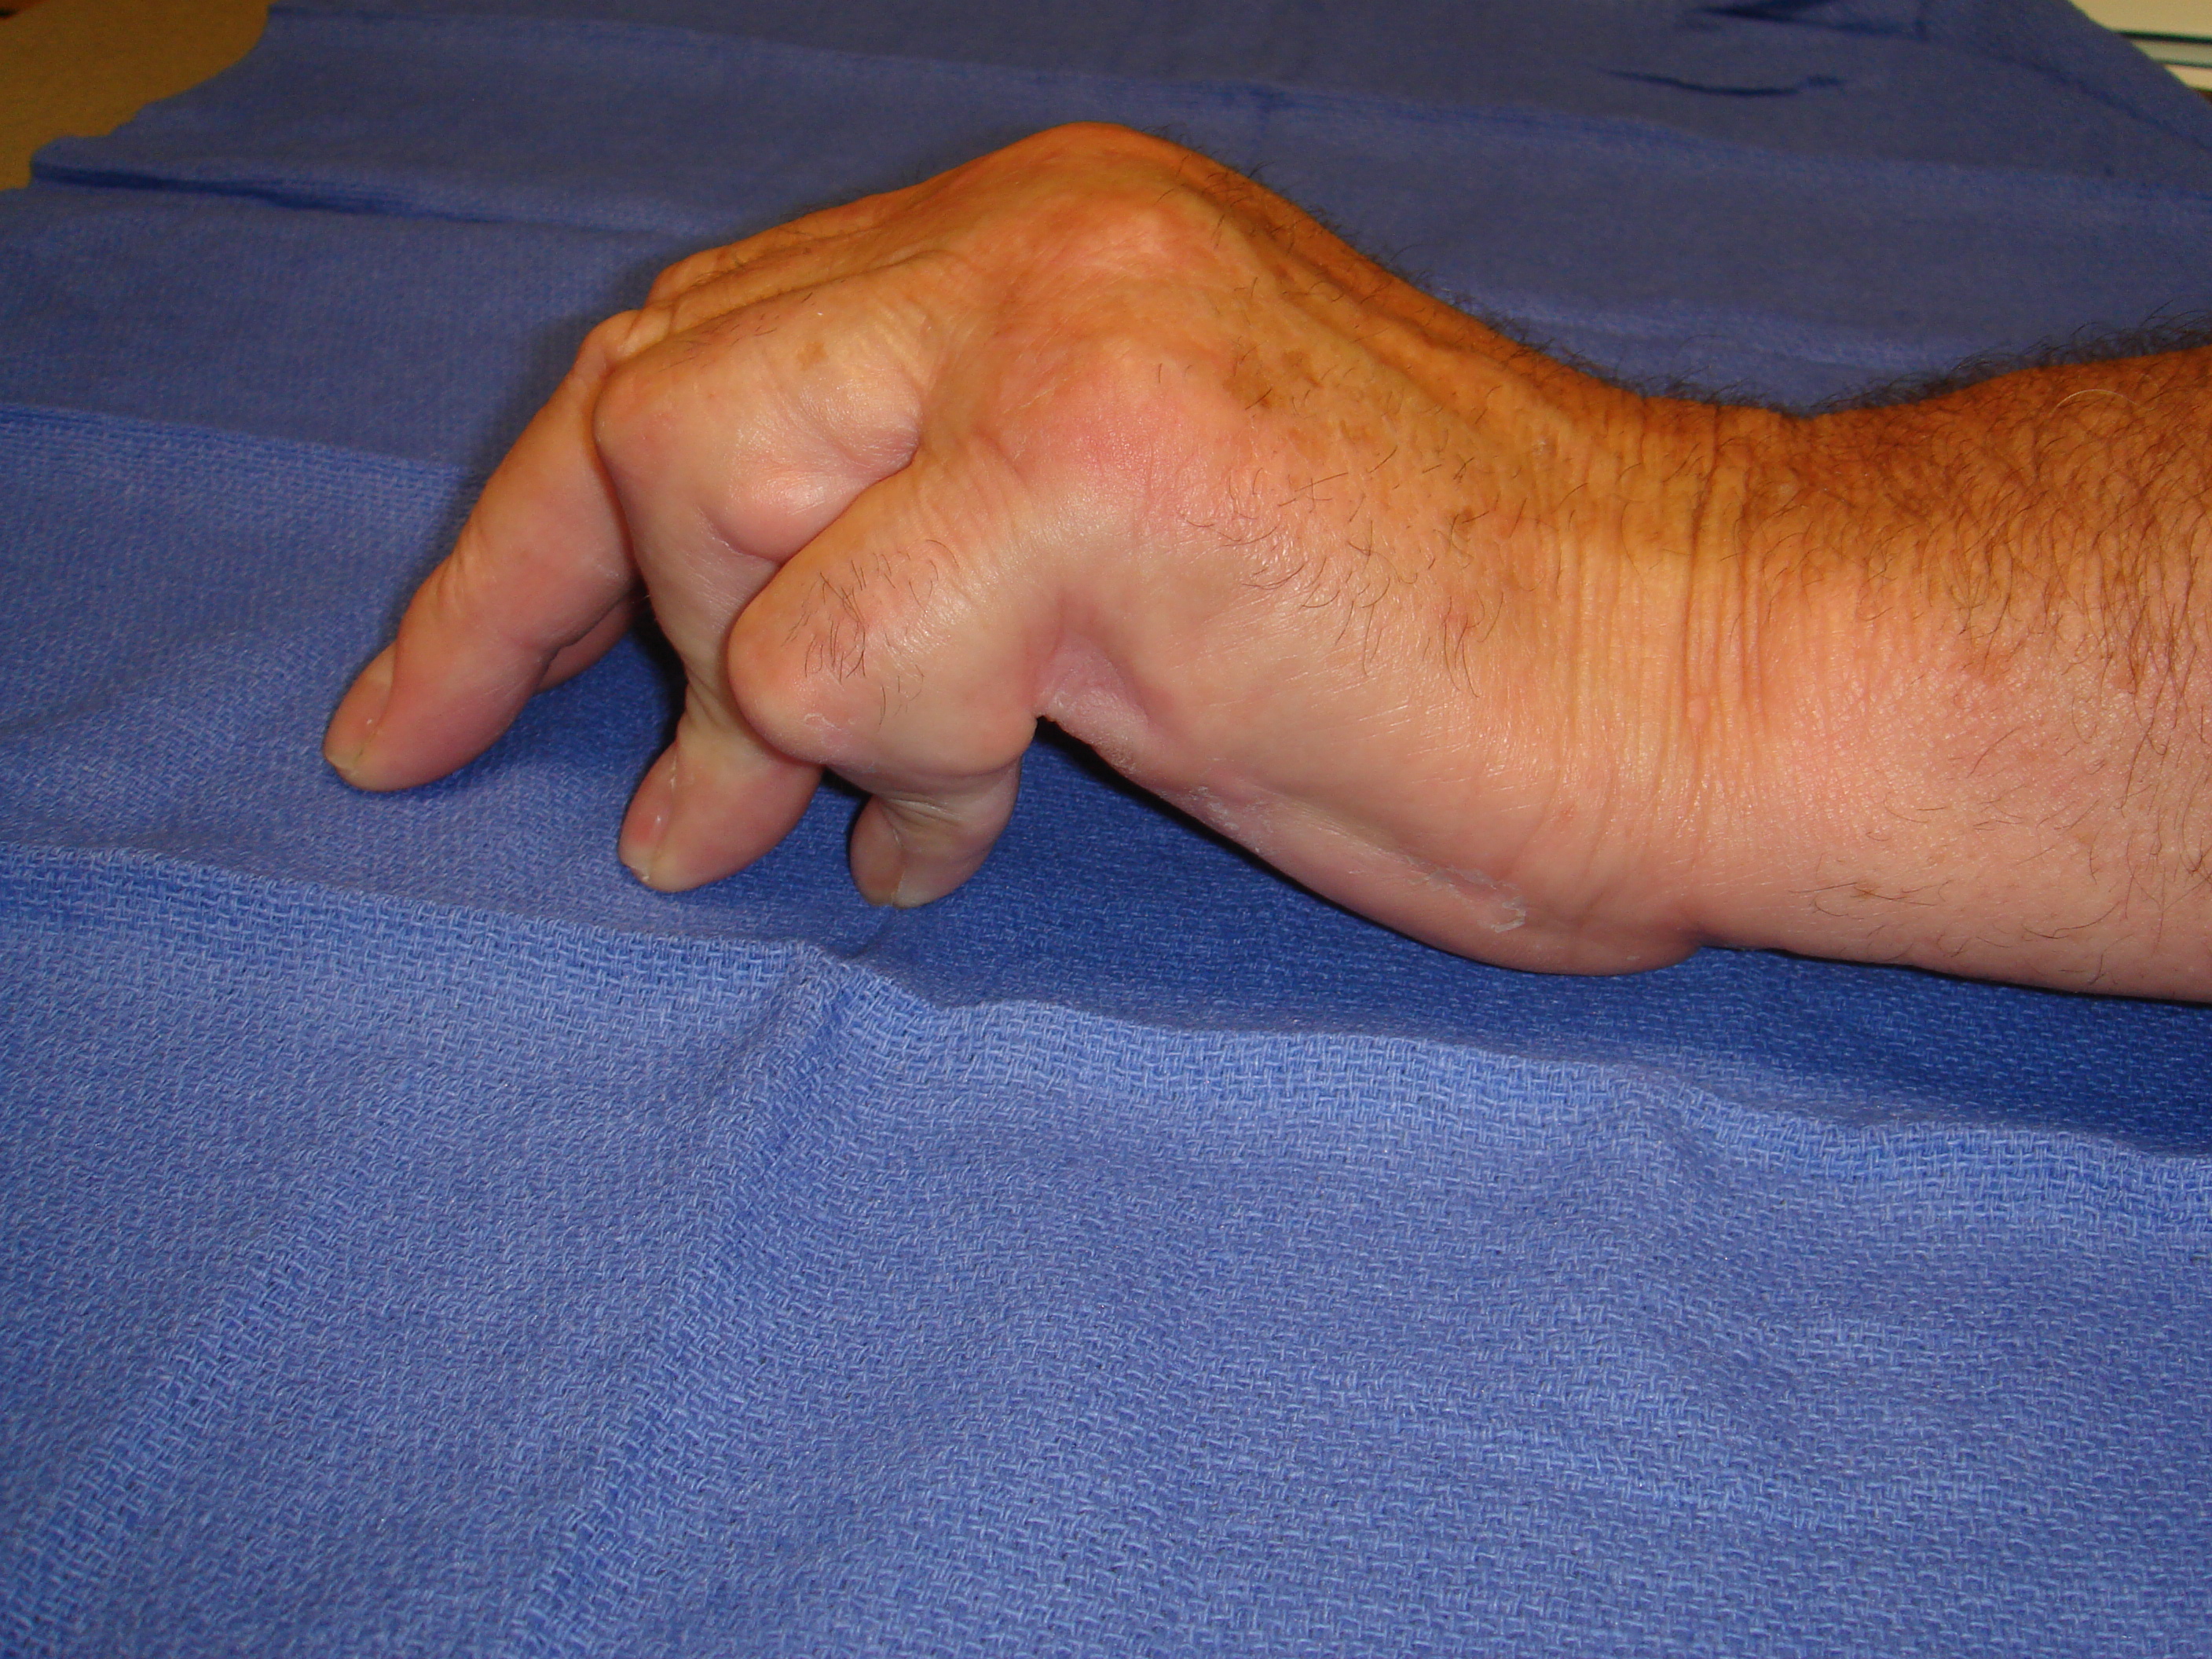 Figure 6a: This patient has advanced post-surgical recurrence of Dupuytren’s contracture affecting his left ring and little fingers. There is very limited active and passive ROM. The patient refused to have surgery again, despite dysfunction, but sought collagenase on the advice of a friend who was treated with CCH. Identifiable, palpable cords are present in addition to scar tissue; ultimately, more than 1 treatment cycle was going to be required; treatment started with the little finger.